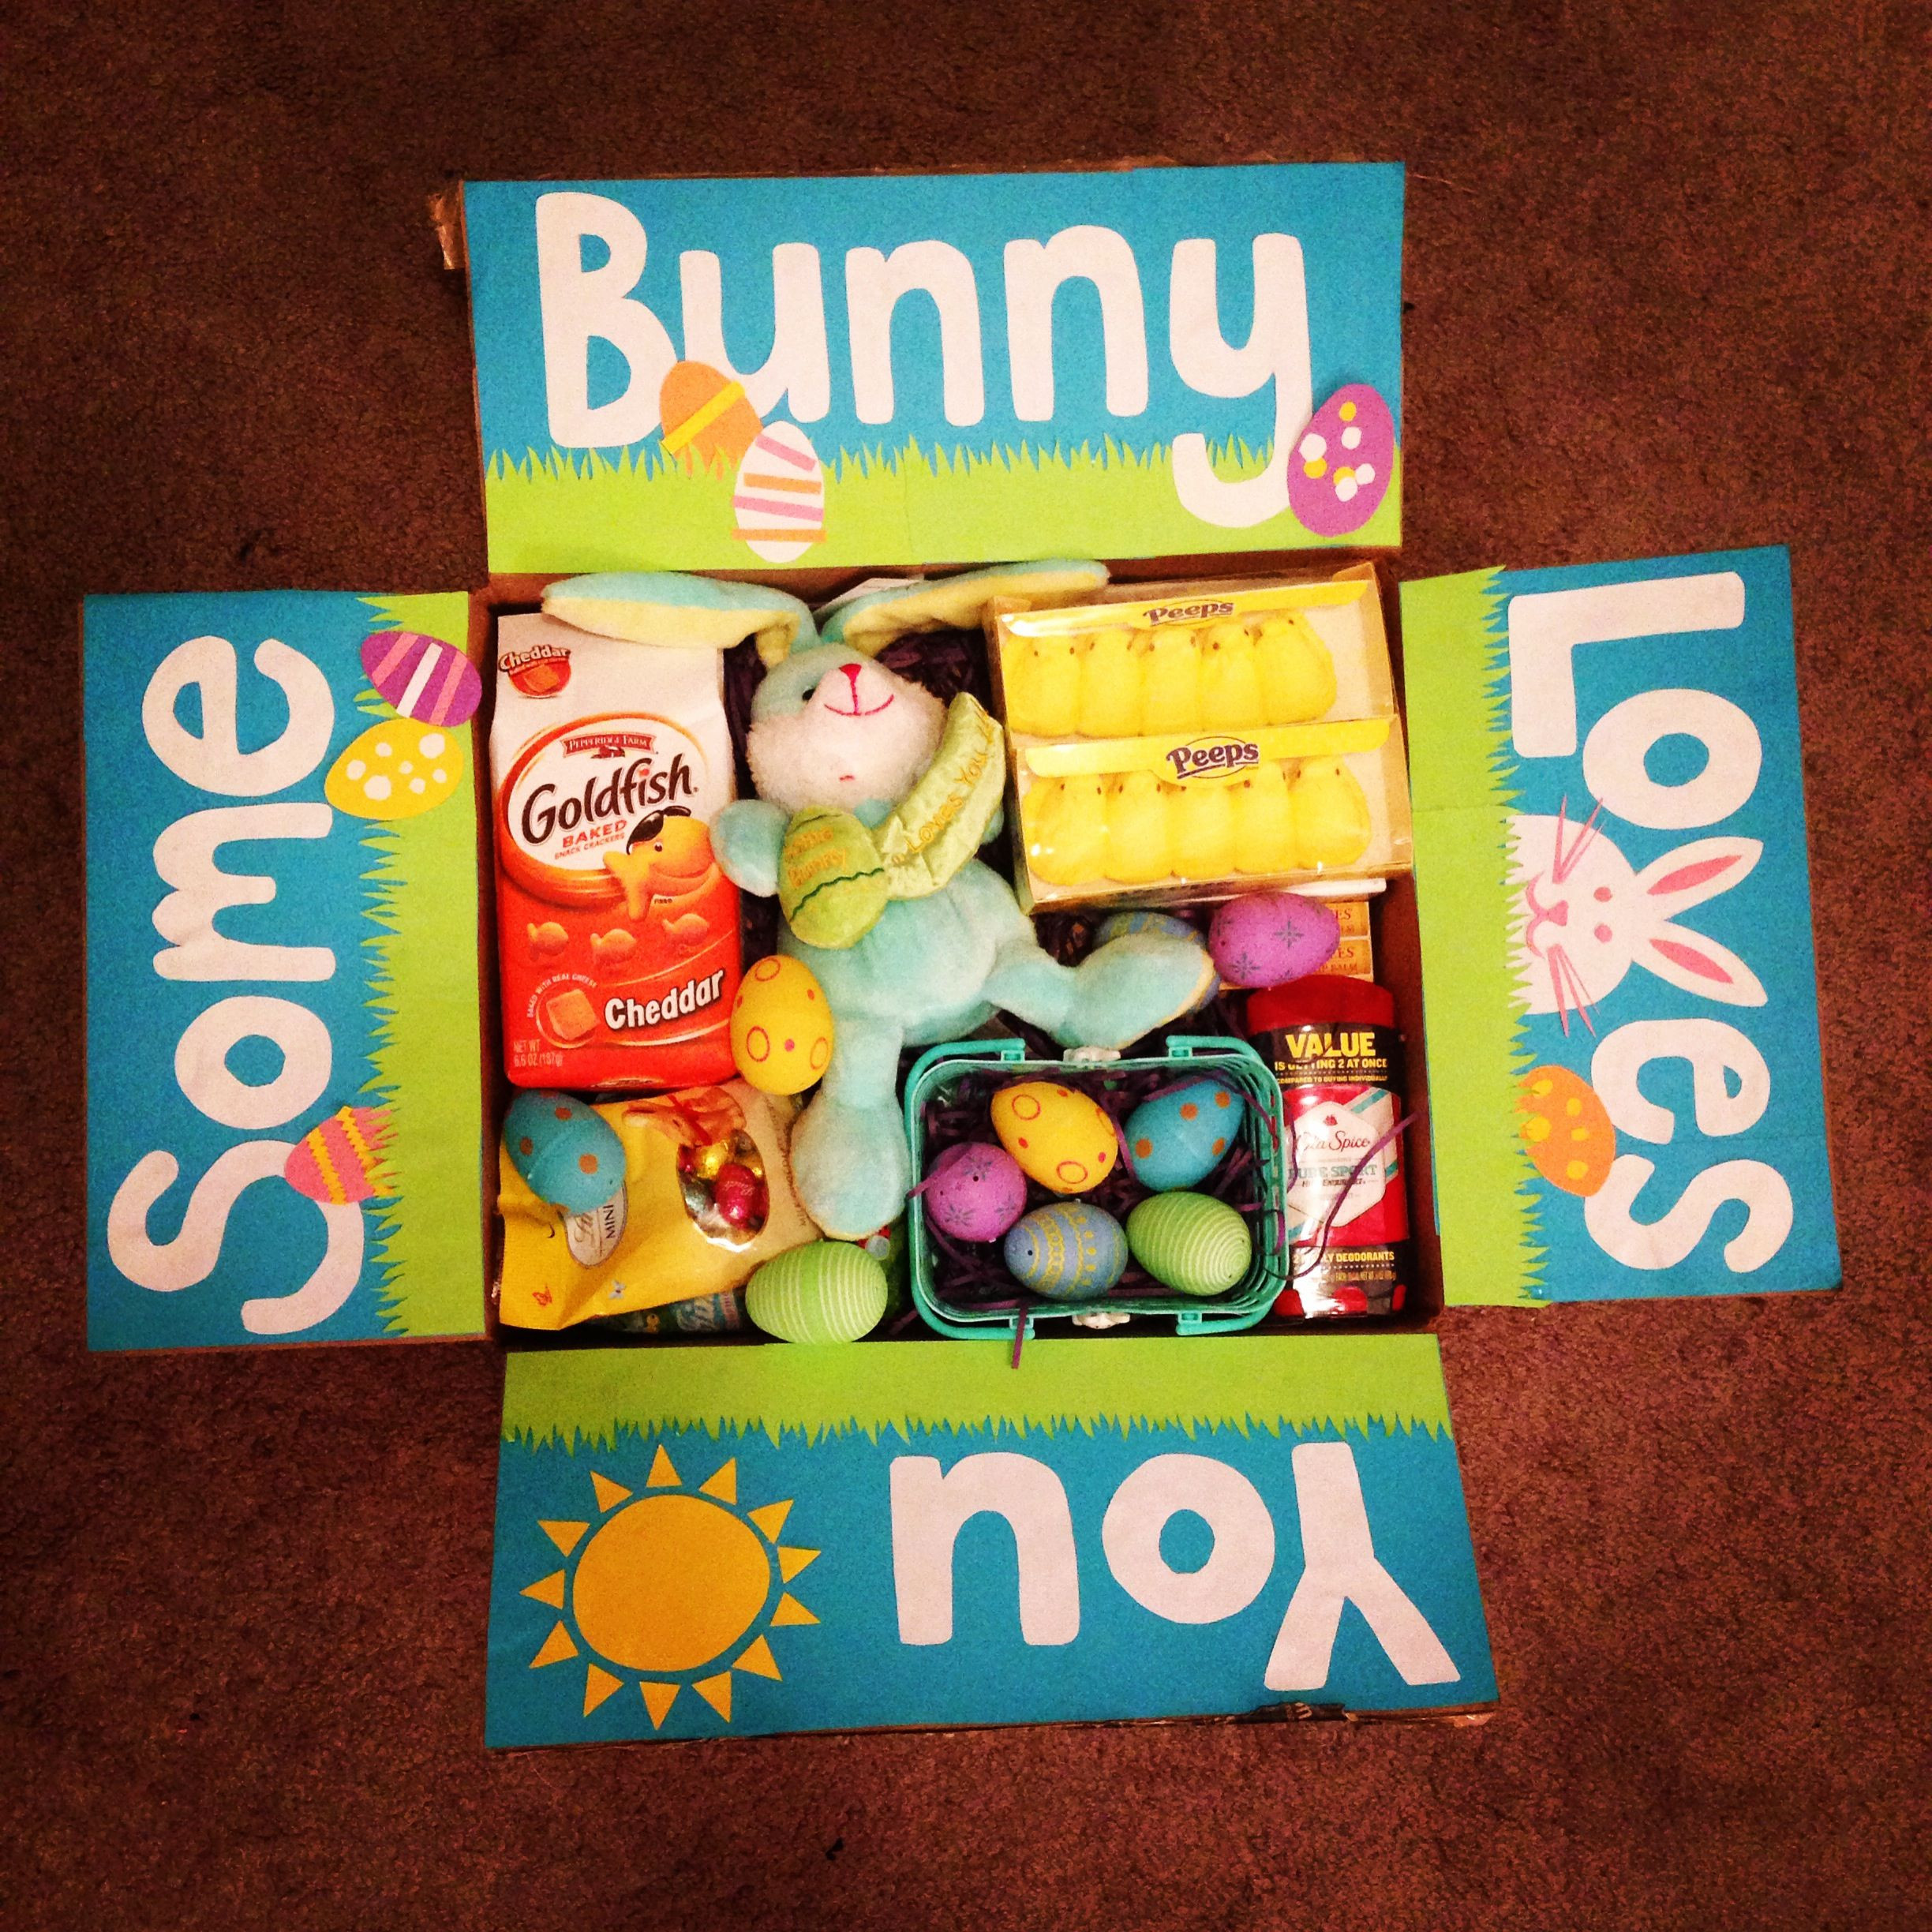 Cute Easter Basket Ideas For Boyfriend
 Easter care package for my boyfriend in the navy